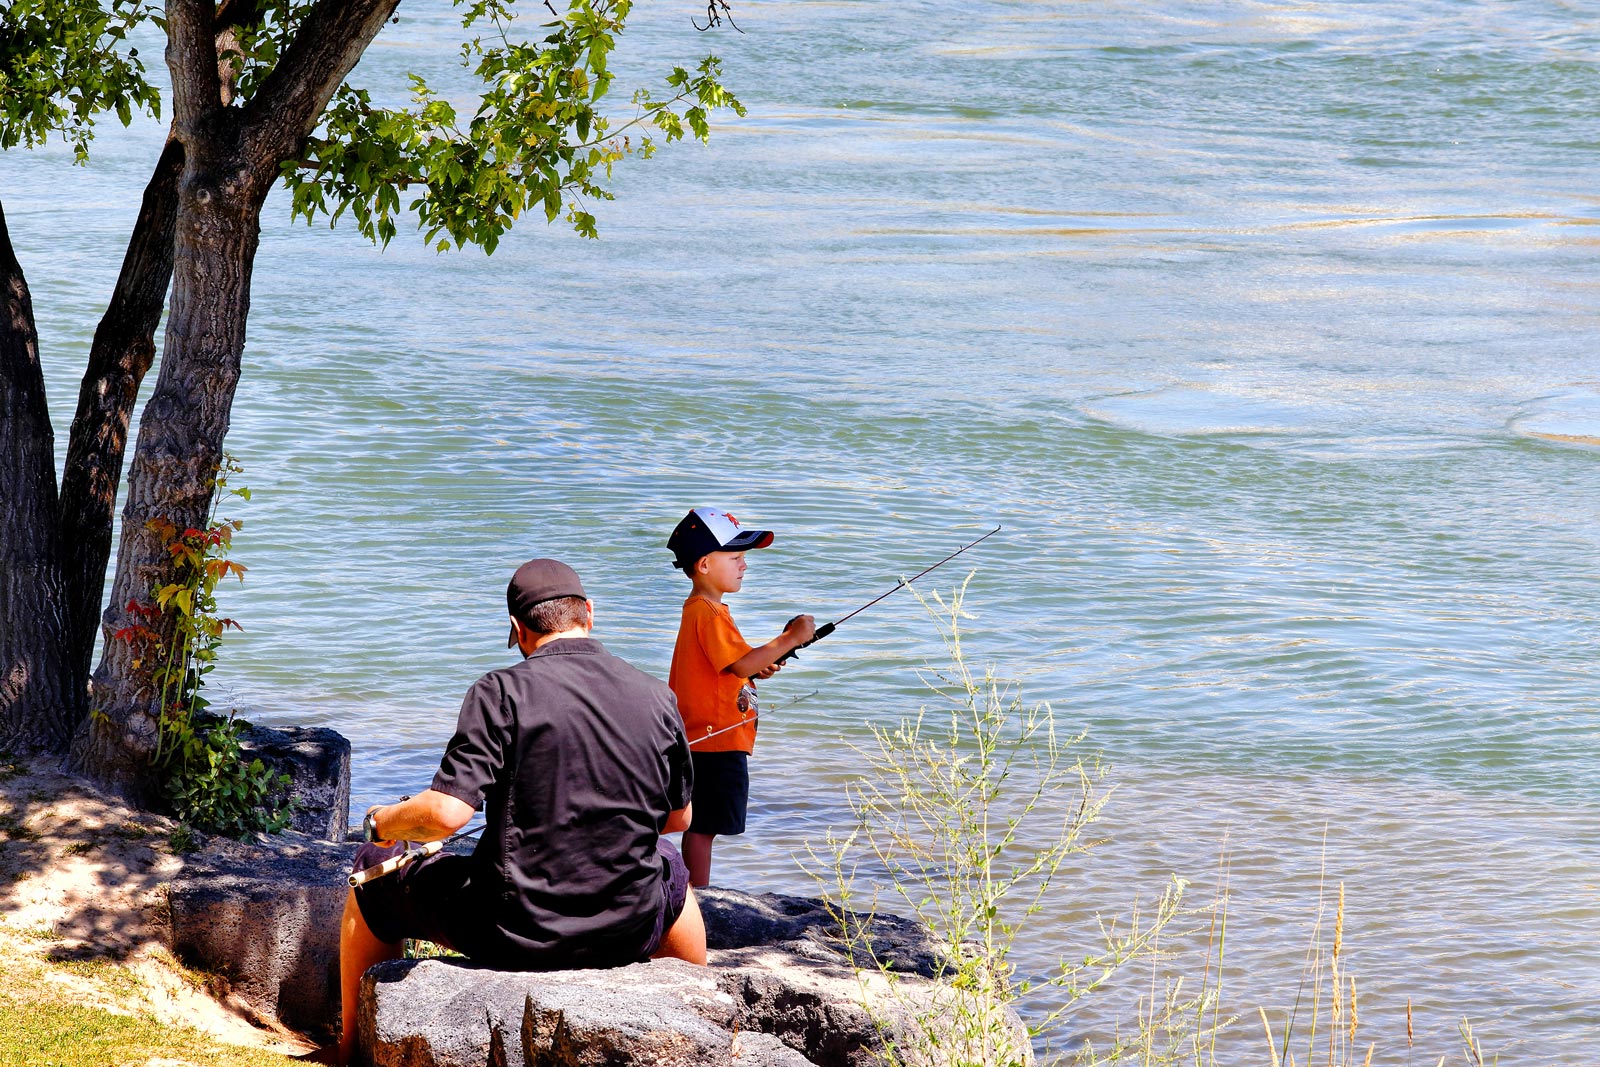 Kid fishing with his dad